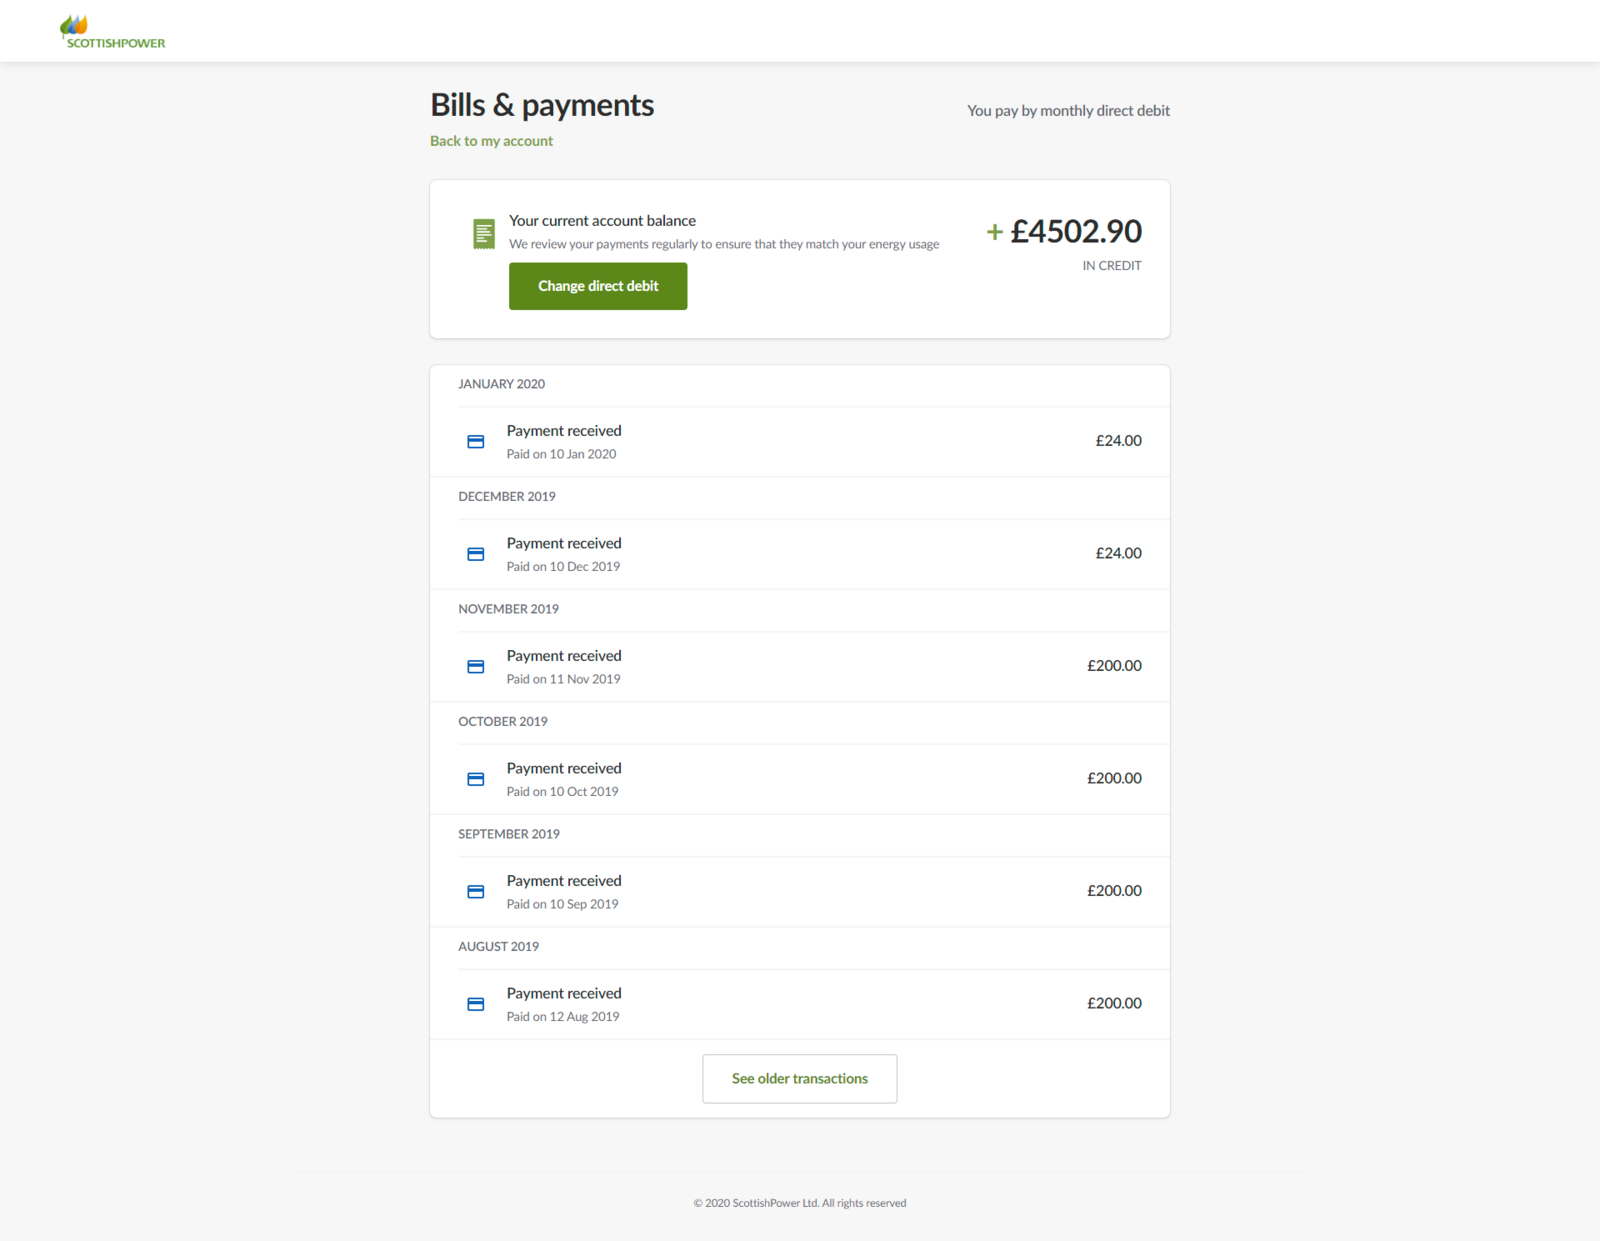 screencapture-account-scottishpower-co-uk-my-account-bills-and-payments-2020-02-15-09_57_58.png